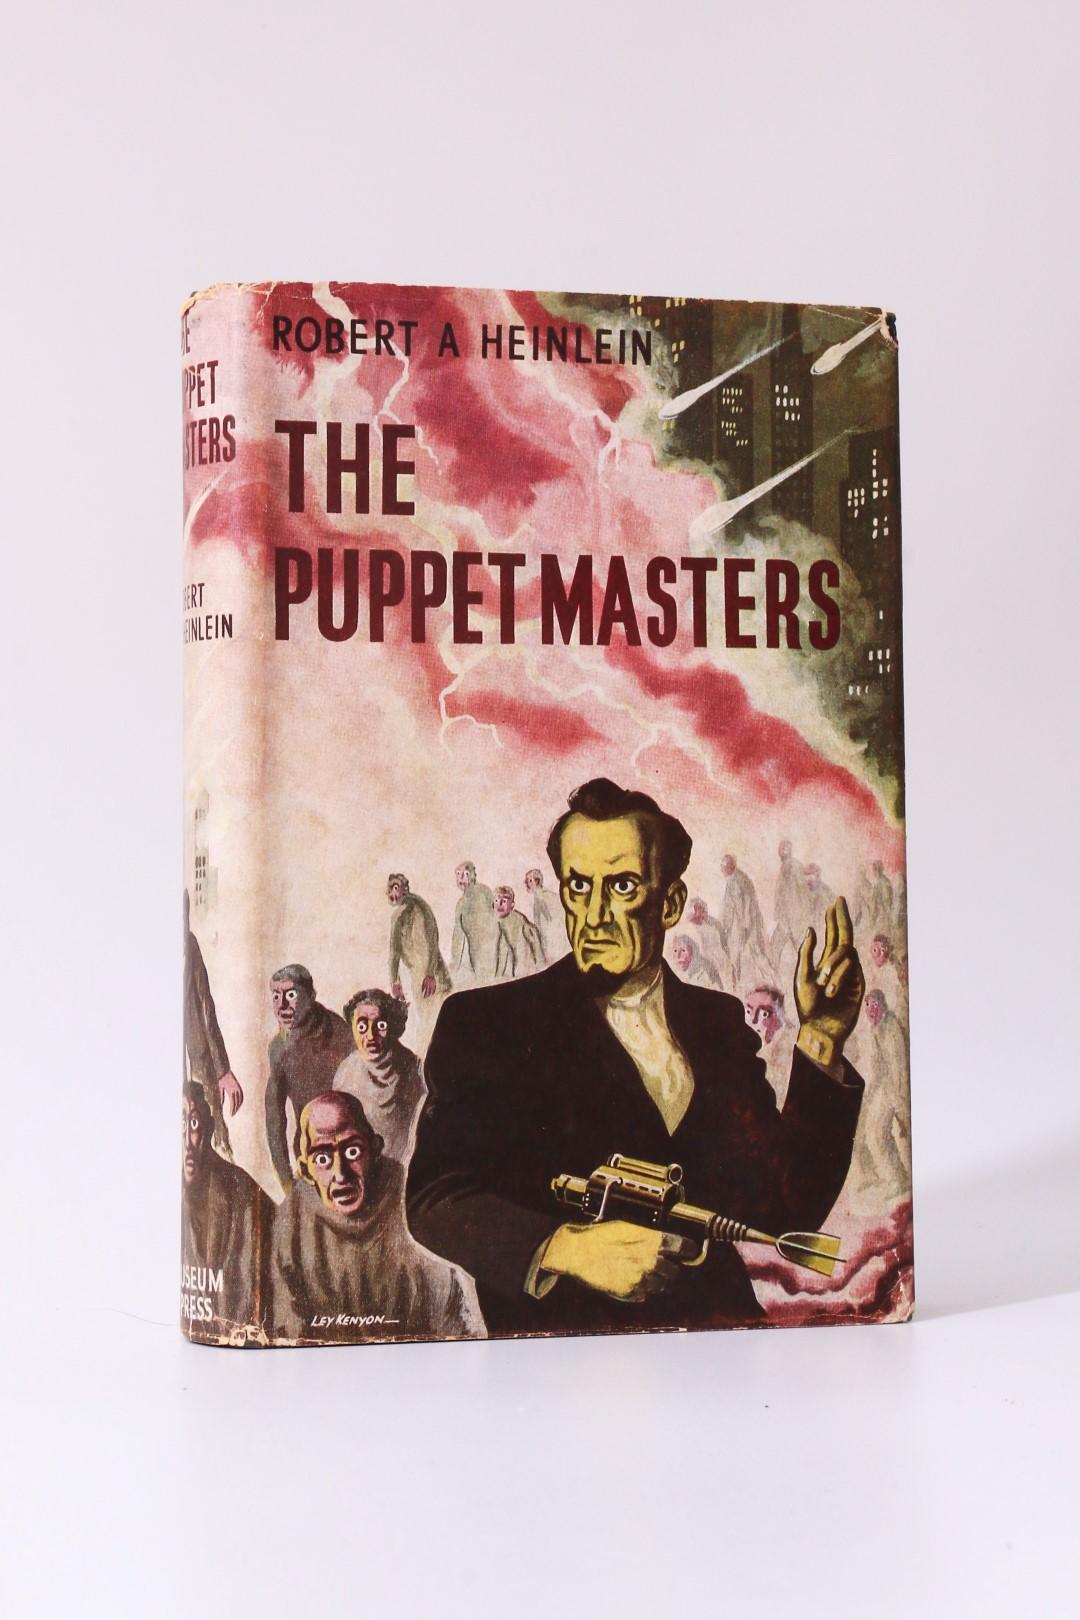 Robert Heinlein - The Puppet Masters - Museum Press / Science Fiction Club, 1953, First Edition.